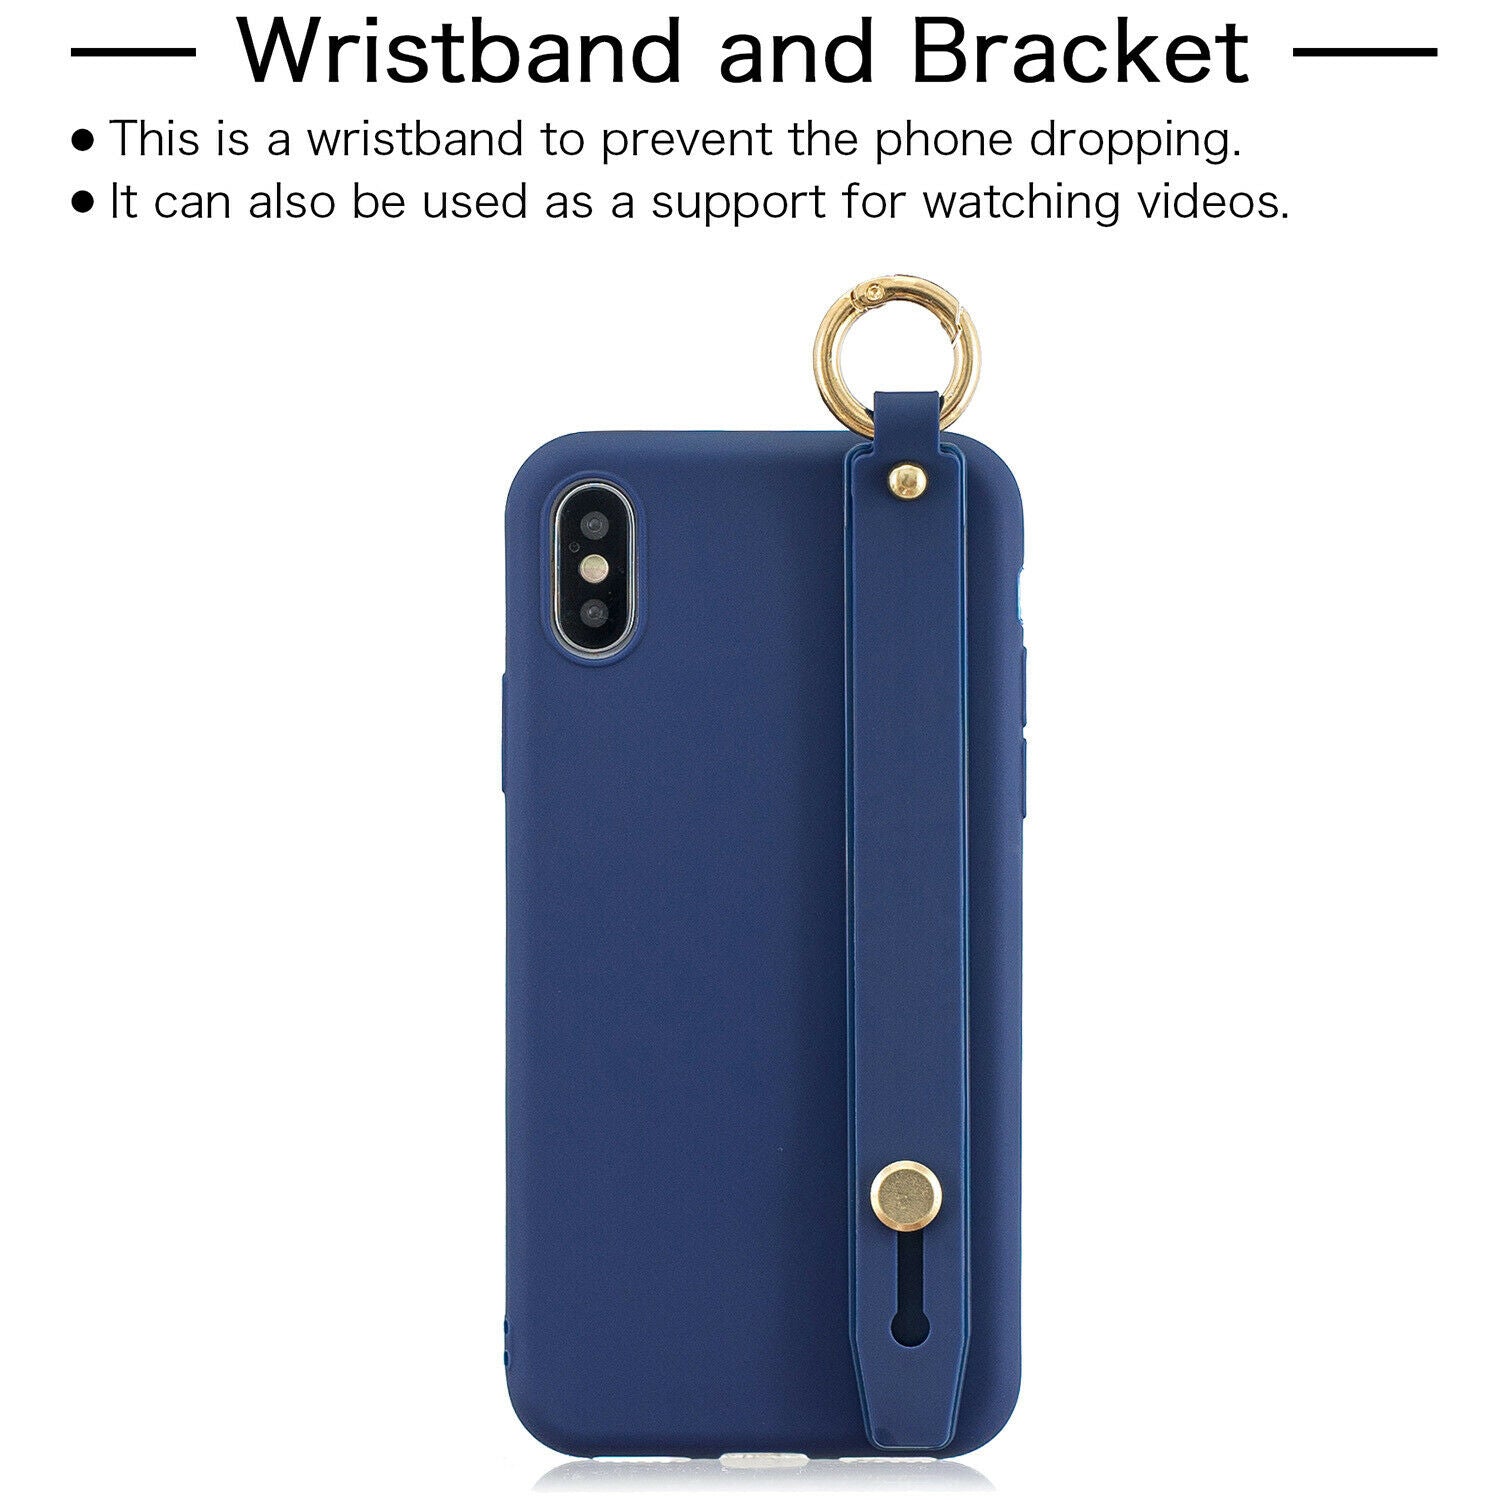 Cute Silicone Wrist Strap Protective Phone Case For iPhone - carolay.co